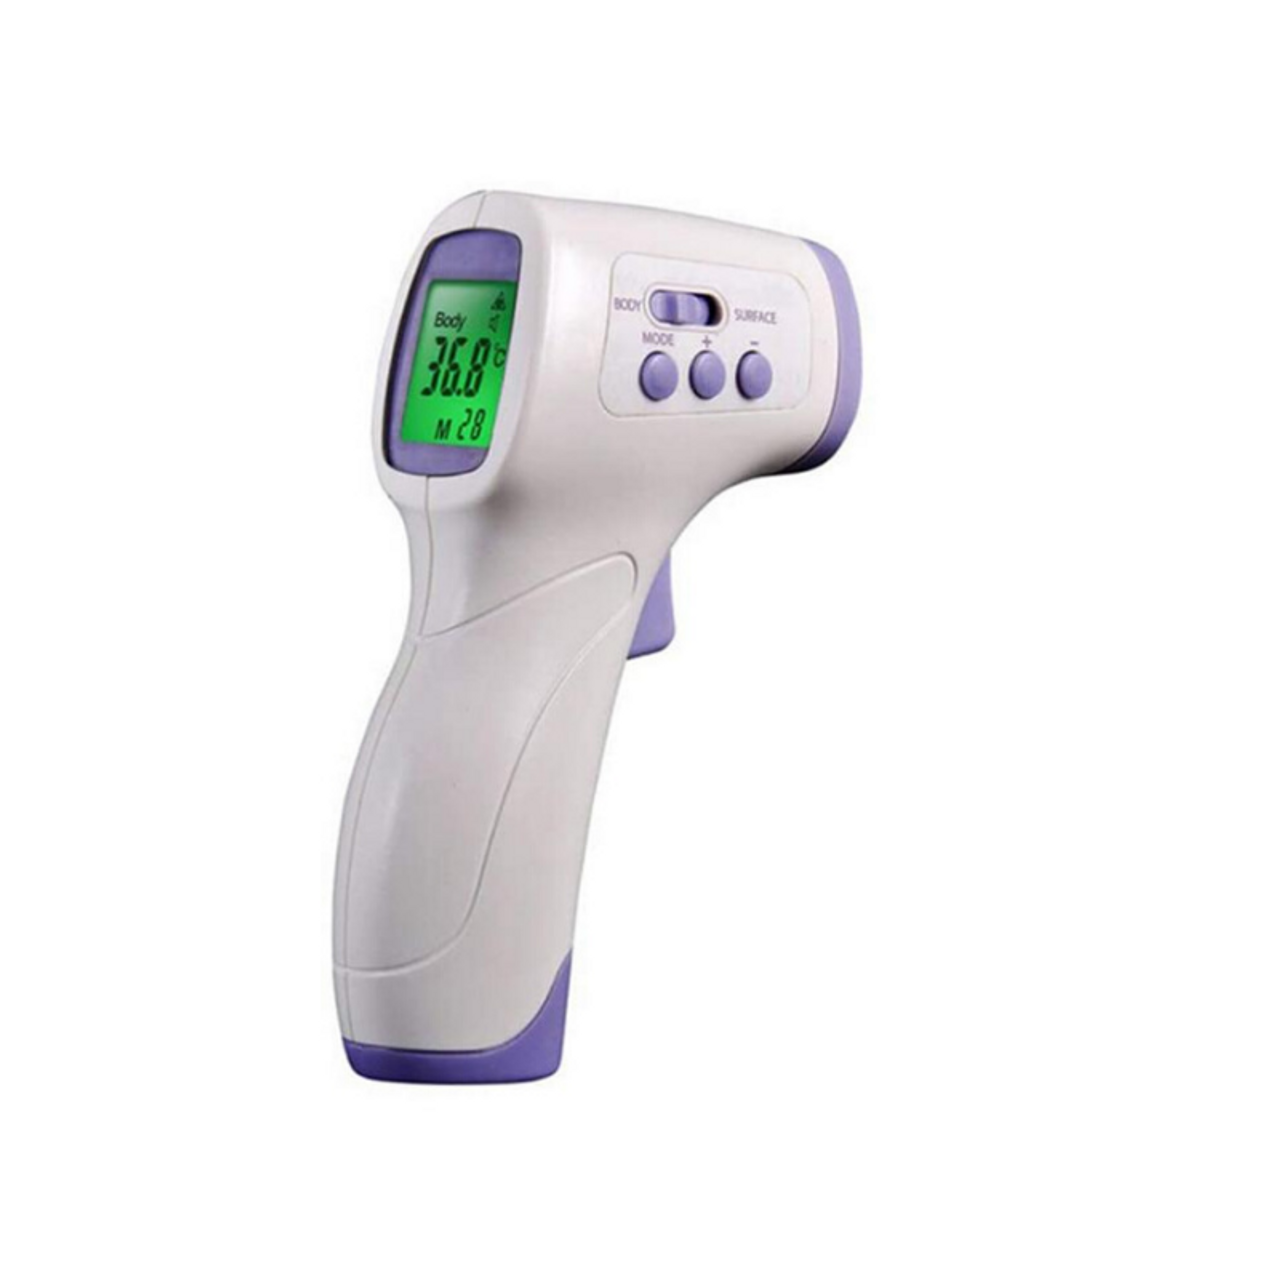 MVP IR Contactless Thermometer W/ 4PK AAA Batteries - 910-388